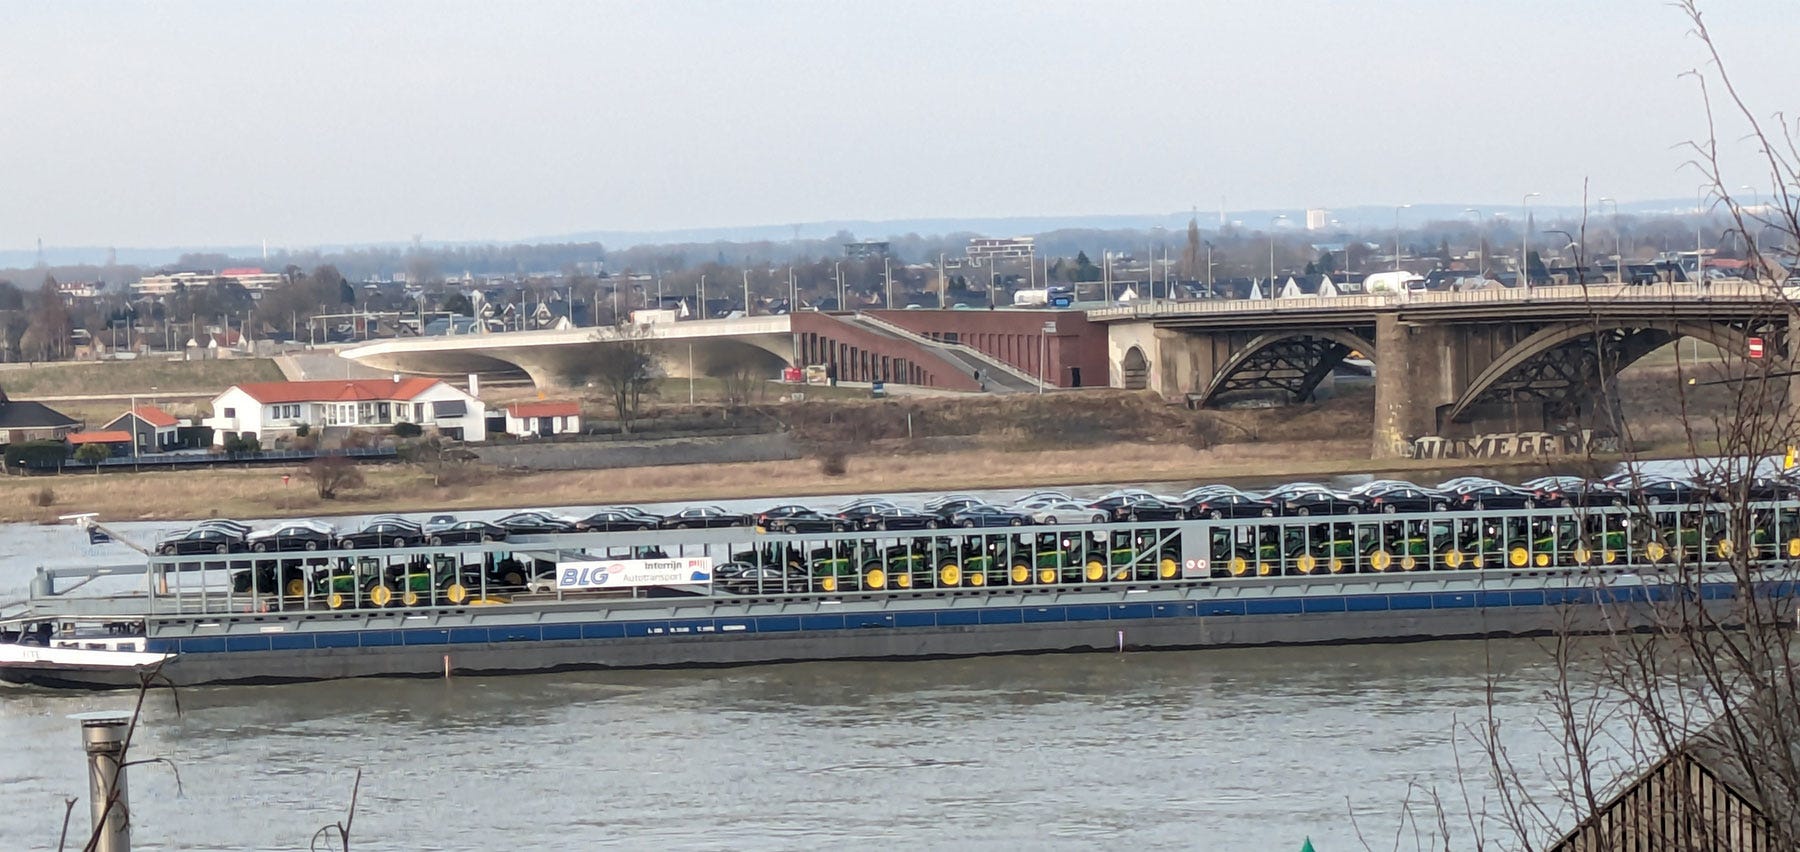 A barge carrying cars and John Deere tractors